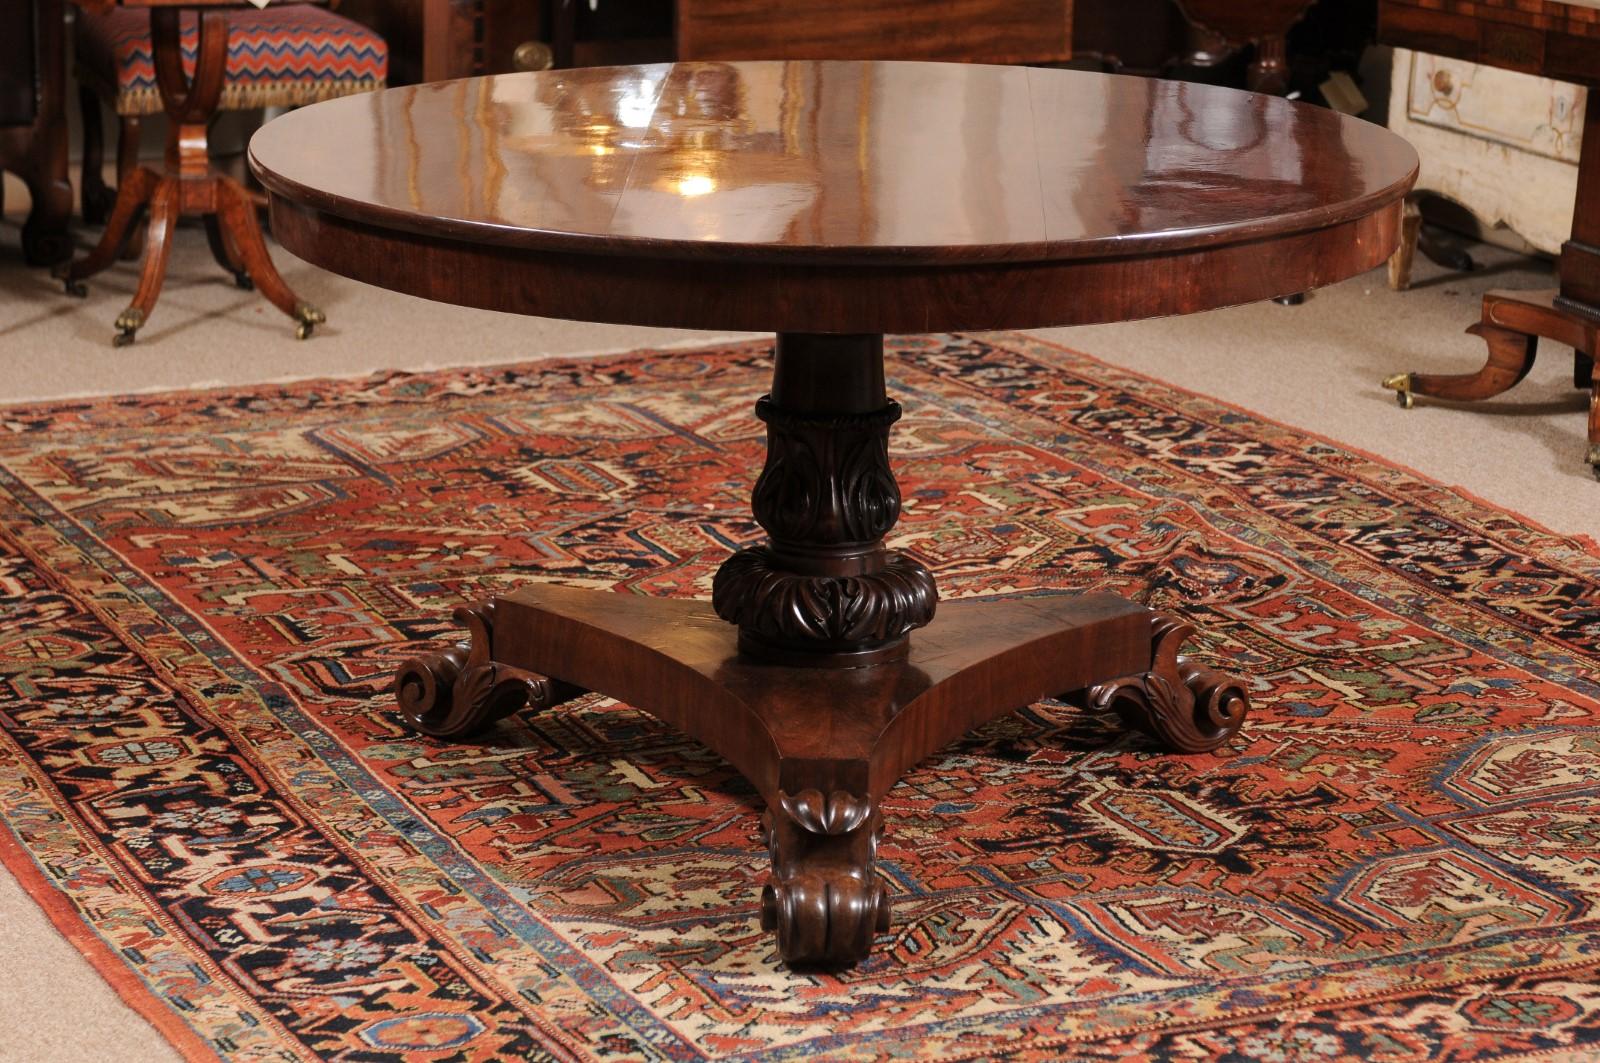  19th Century English Mahogany Center Table with Pedestal Base & Scroll Feet For Sale 6